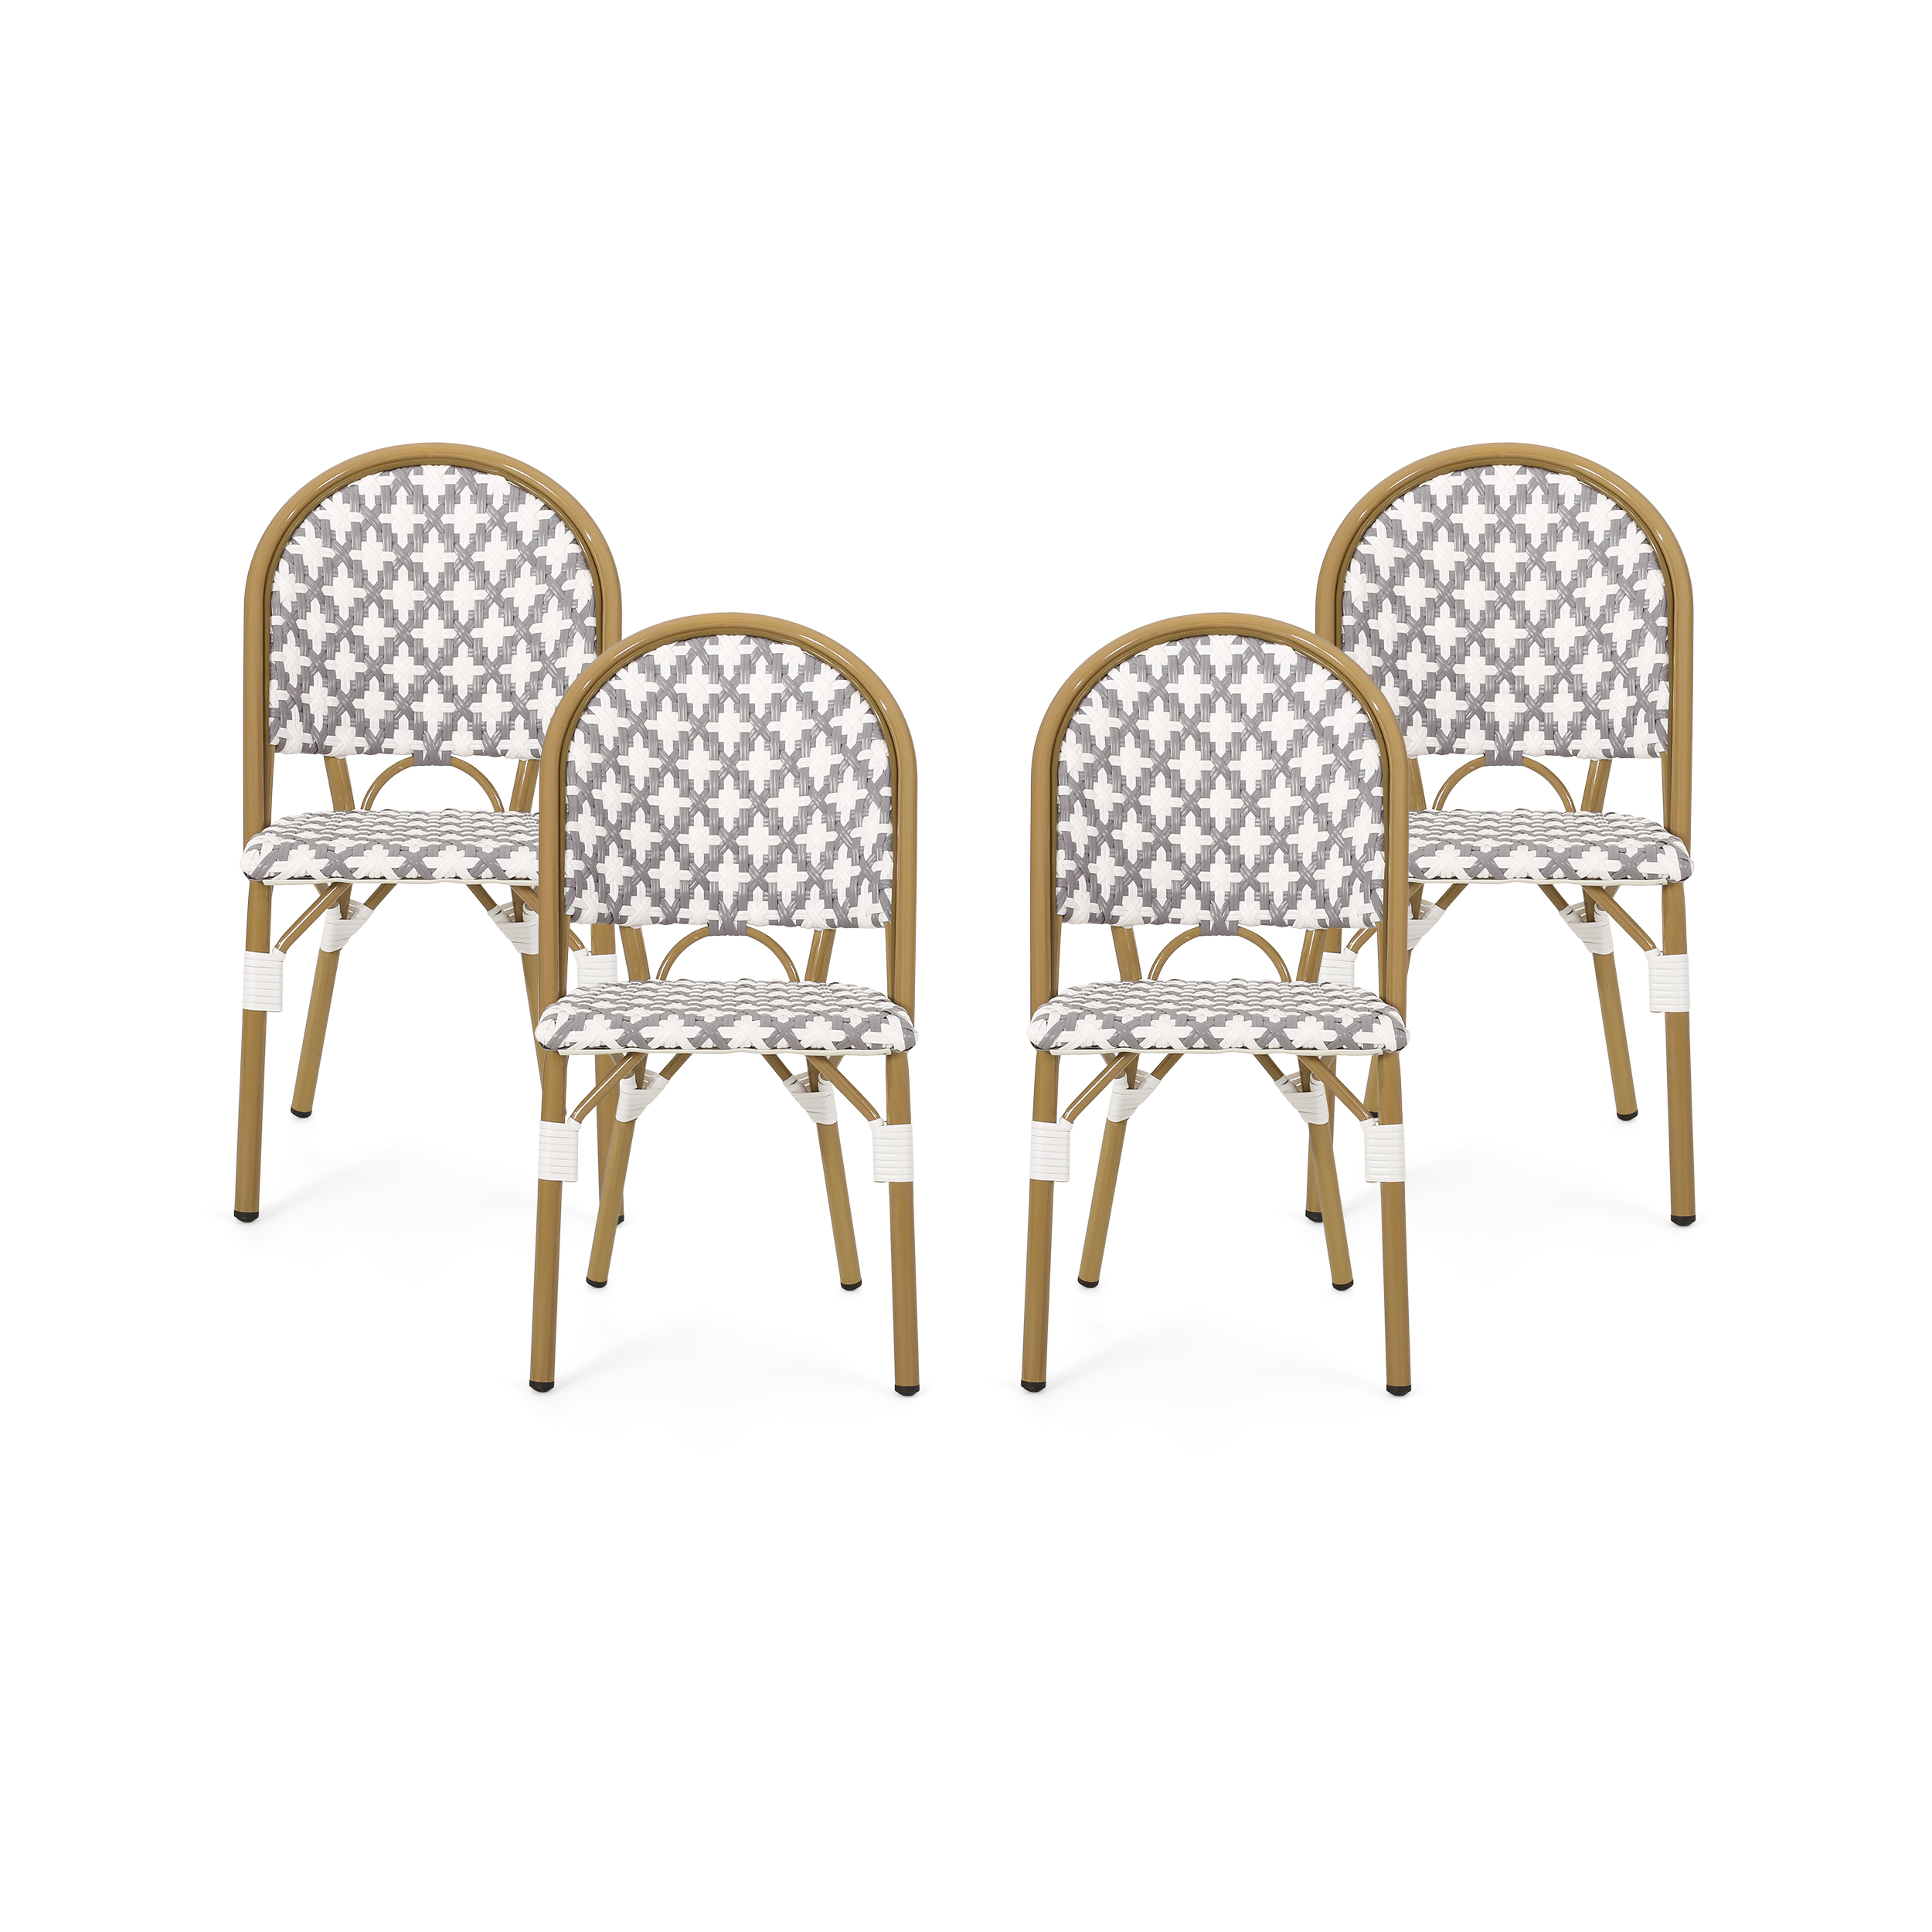 Jordy Outdoor French Bistro Chair , Set of 4, Gray, White, and Bamboo Finish - image 1 of 7